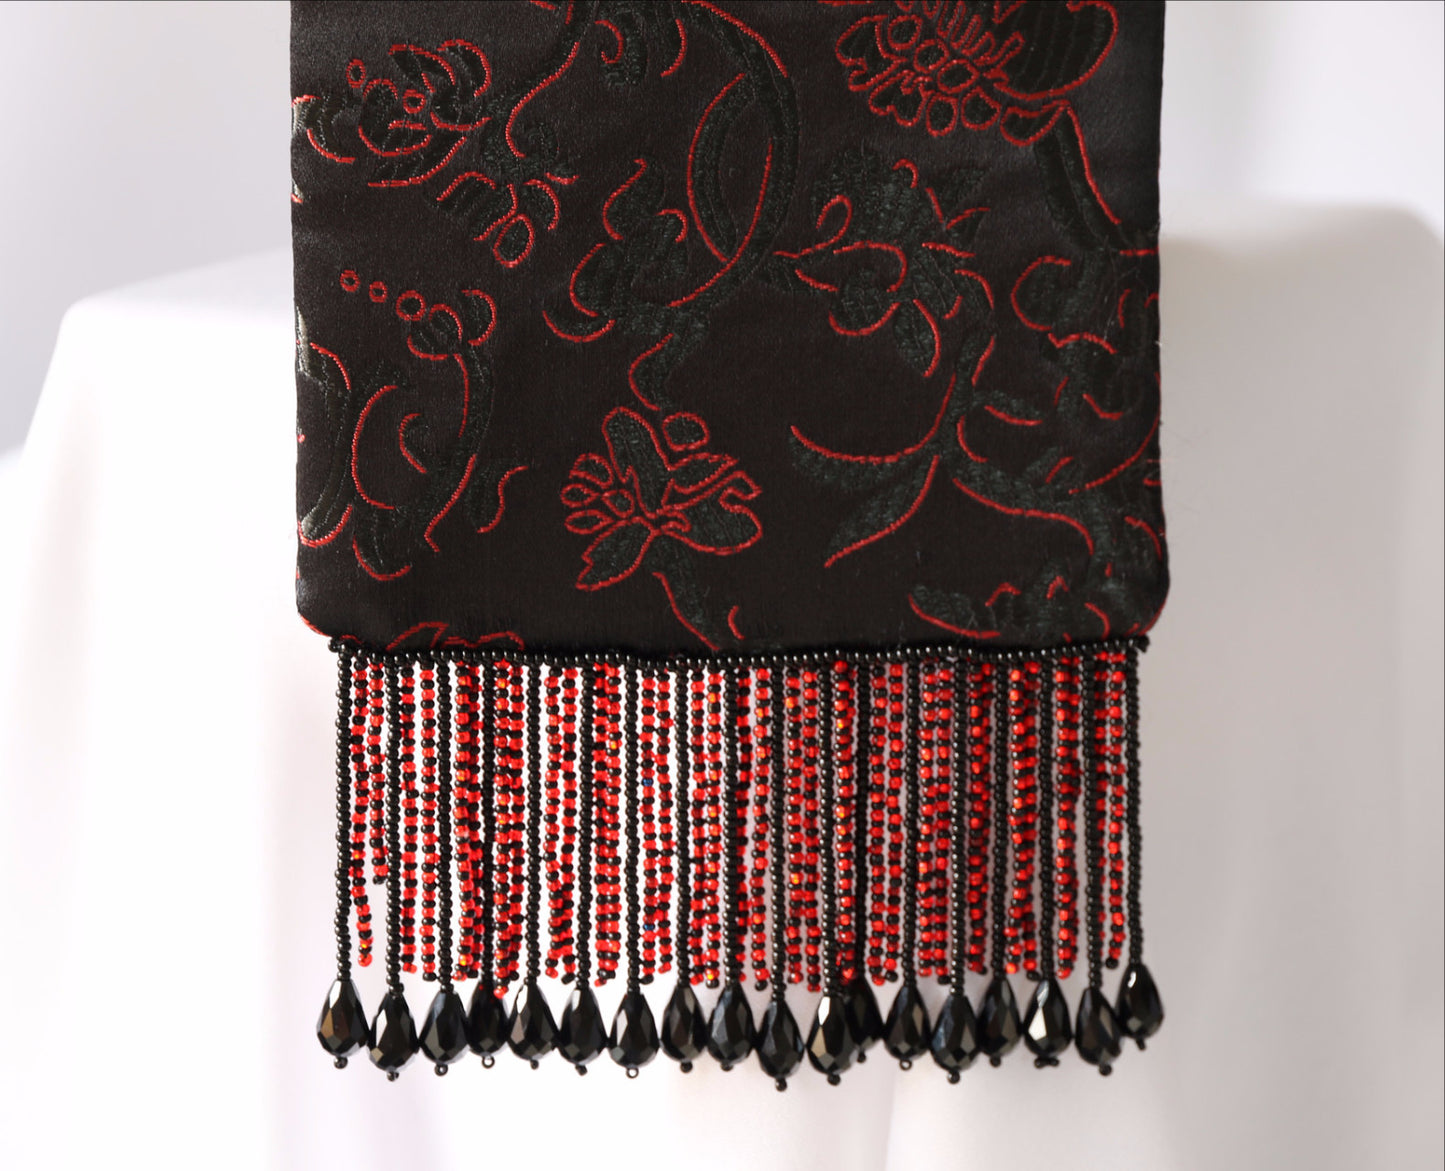 Black and Red Evening Bag from Jenny Jag-Wear Design. Photos showing close up image of the red and black brocade fabric in floral motif, and beaded fringe. The fringe is made up of black tear drop beads and red and black seed beads. The Zara Collection from Jenny Jag-Wear Design.